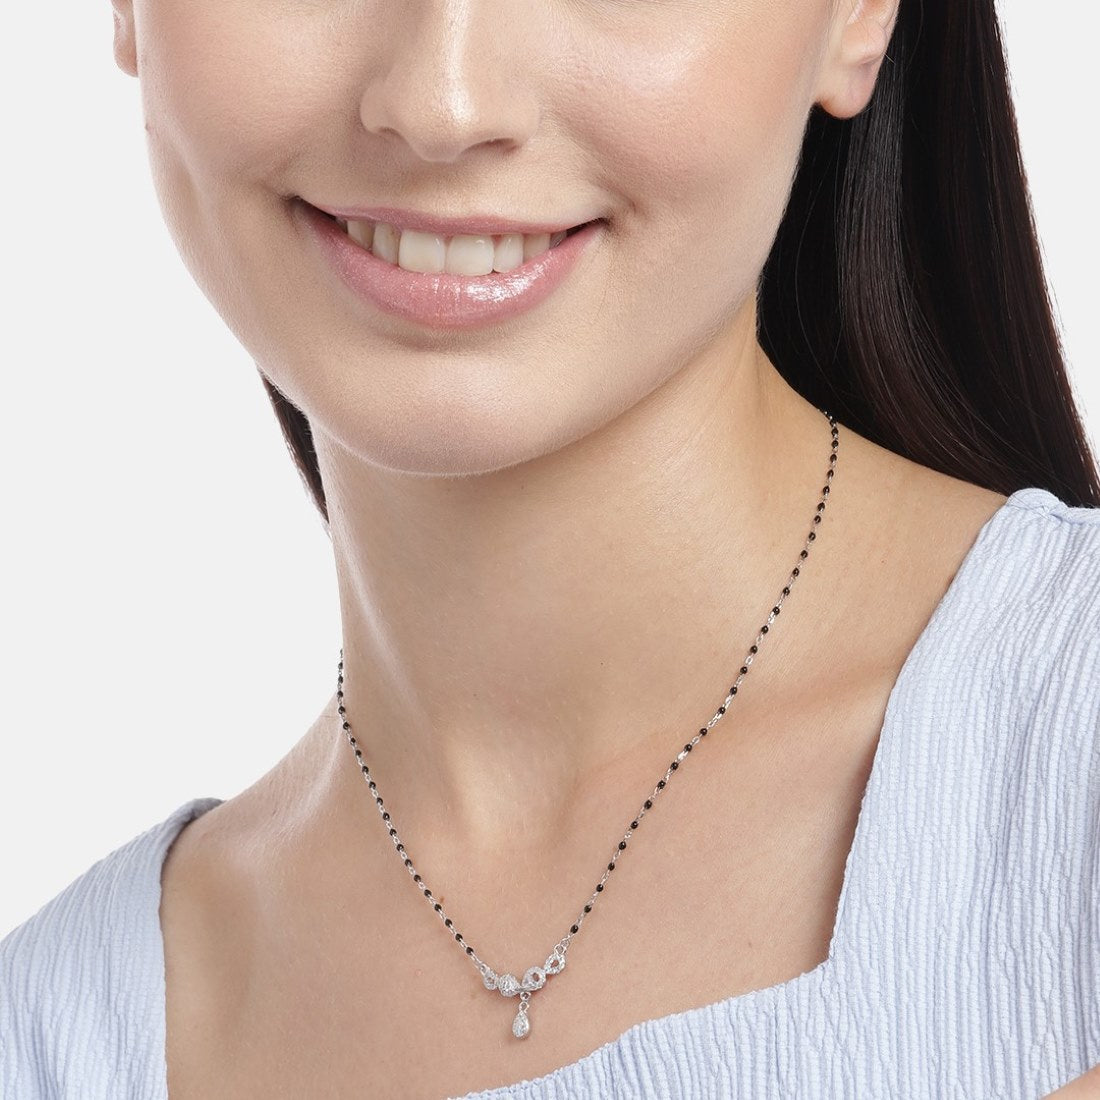 Entwined Eternity Rhodium-Plated 925 Sterling Silver CZ Dual Infinity Mangalsutra